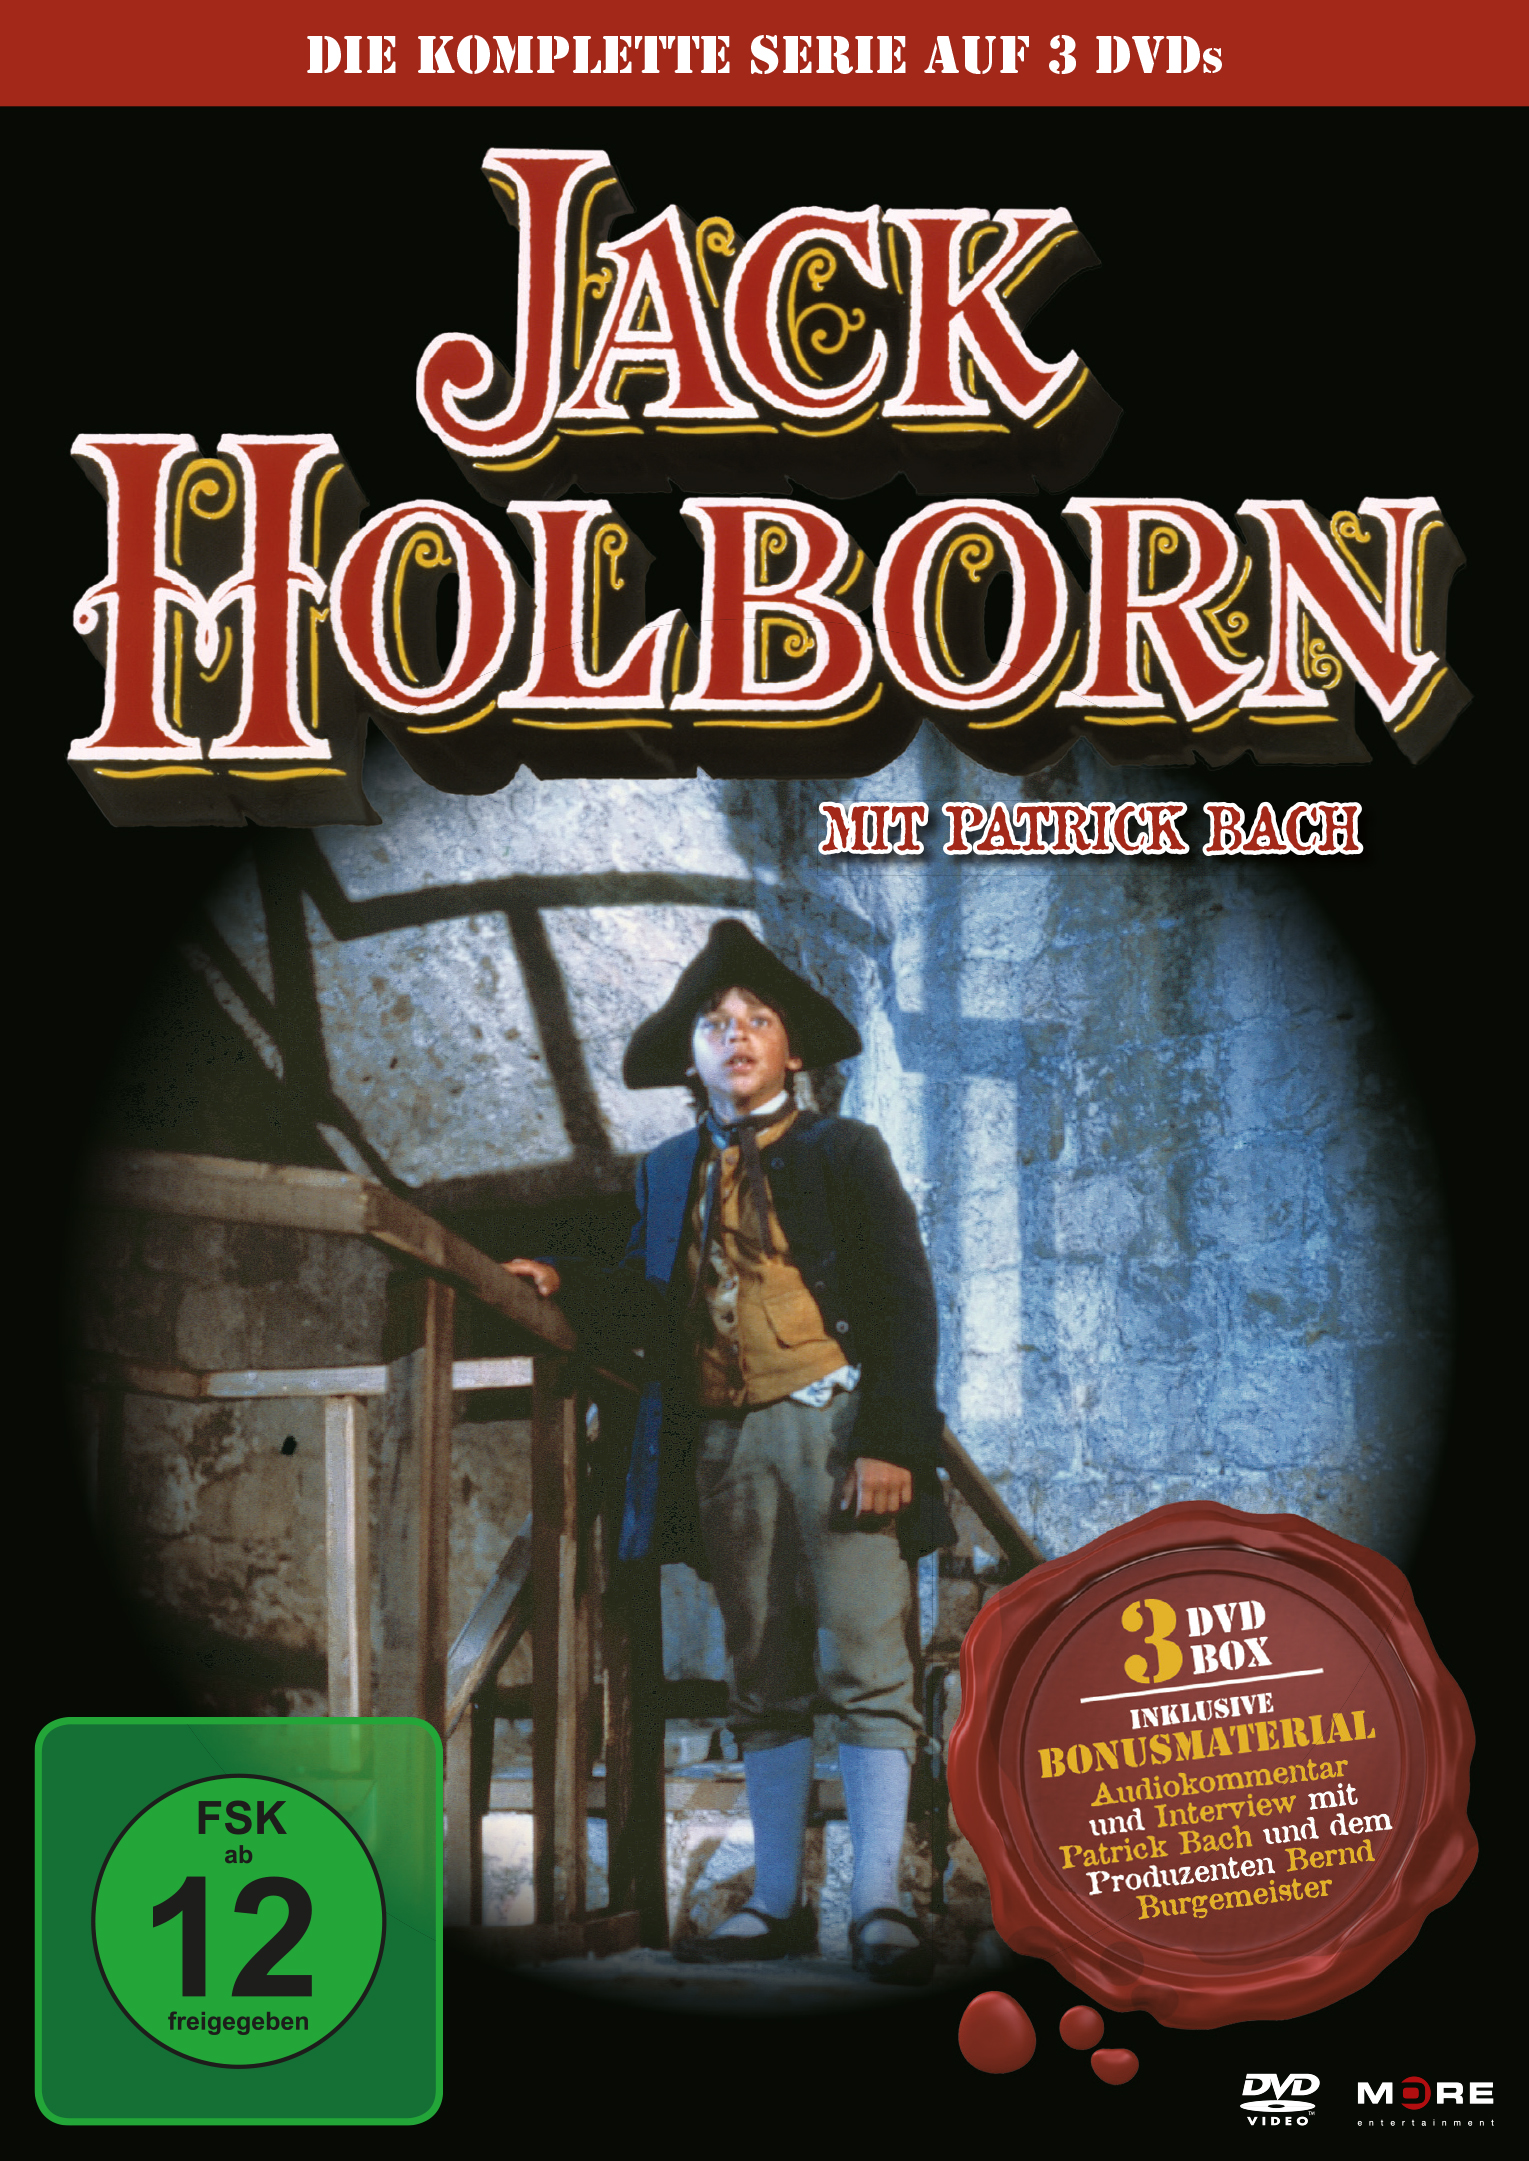 Jack Holborn (1982) with Patrick Bach Complete Series on DVD 2